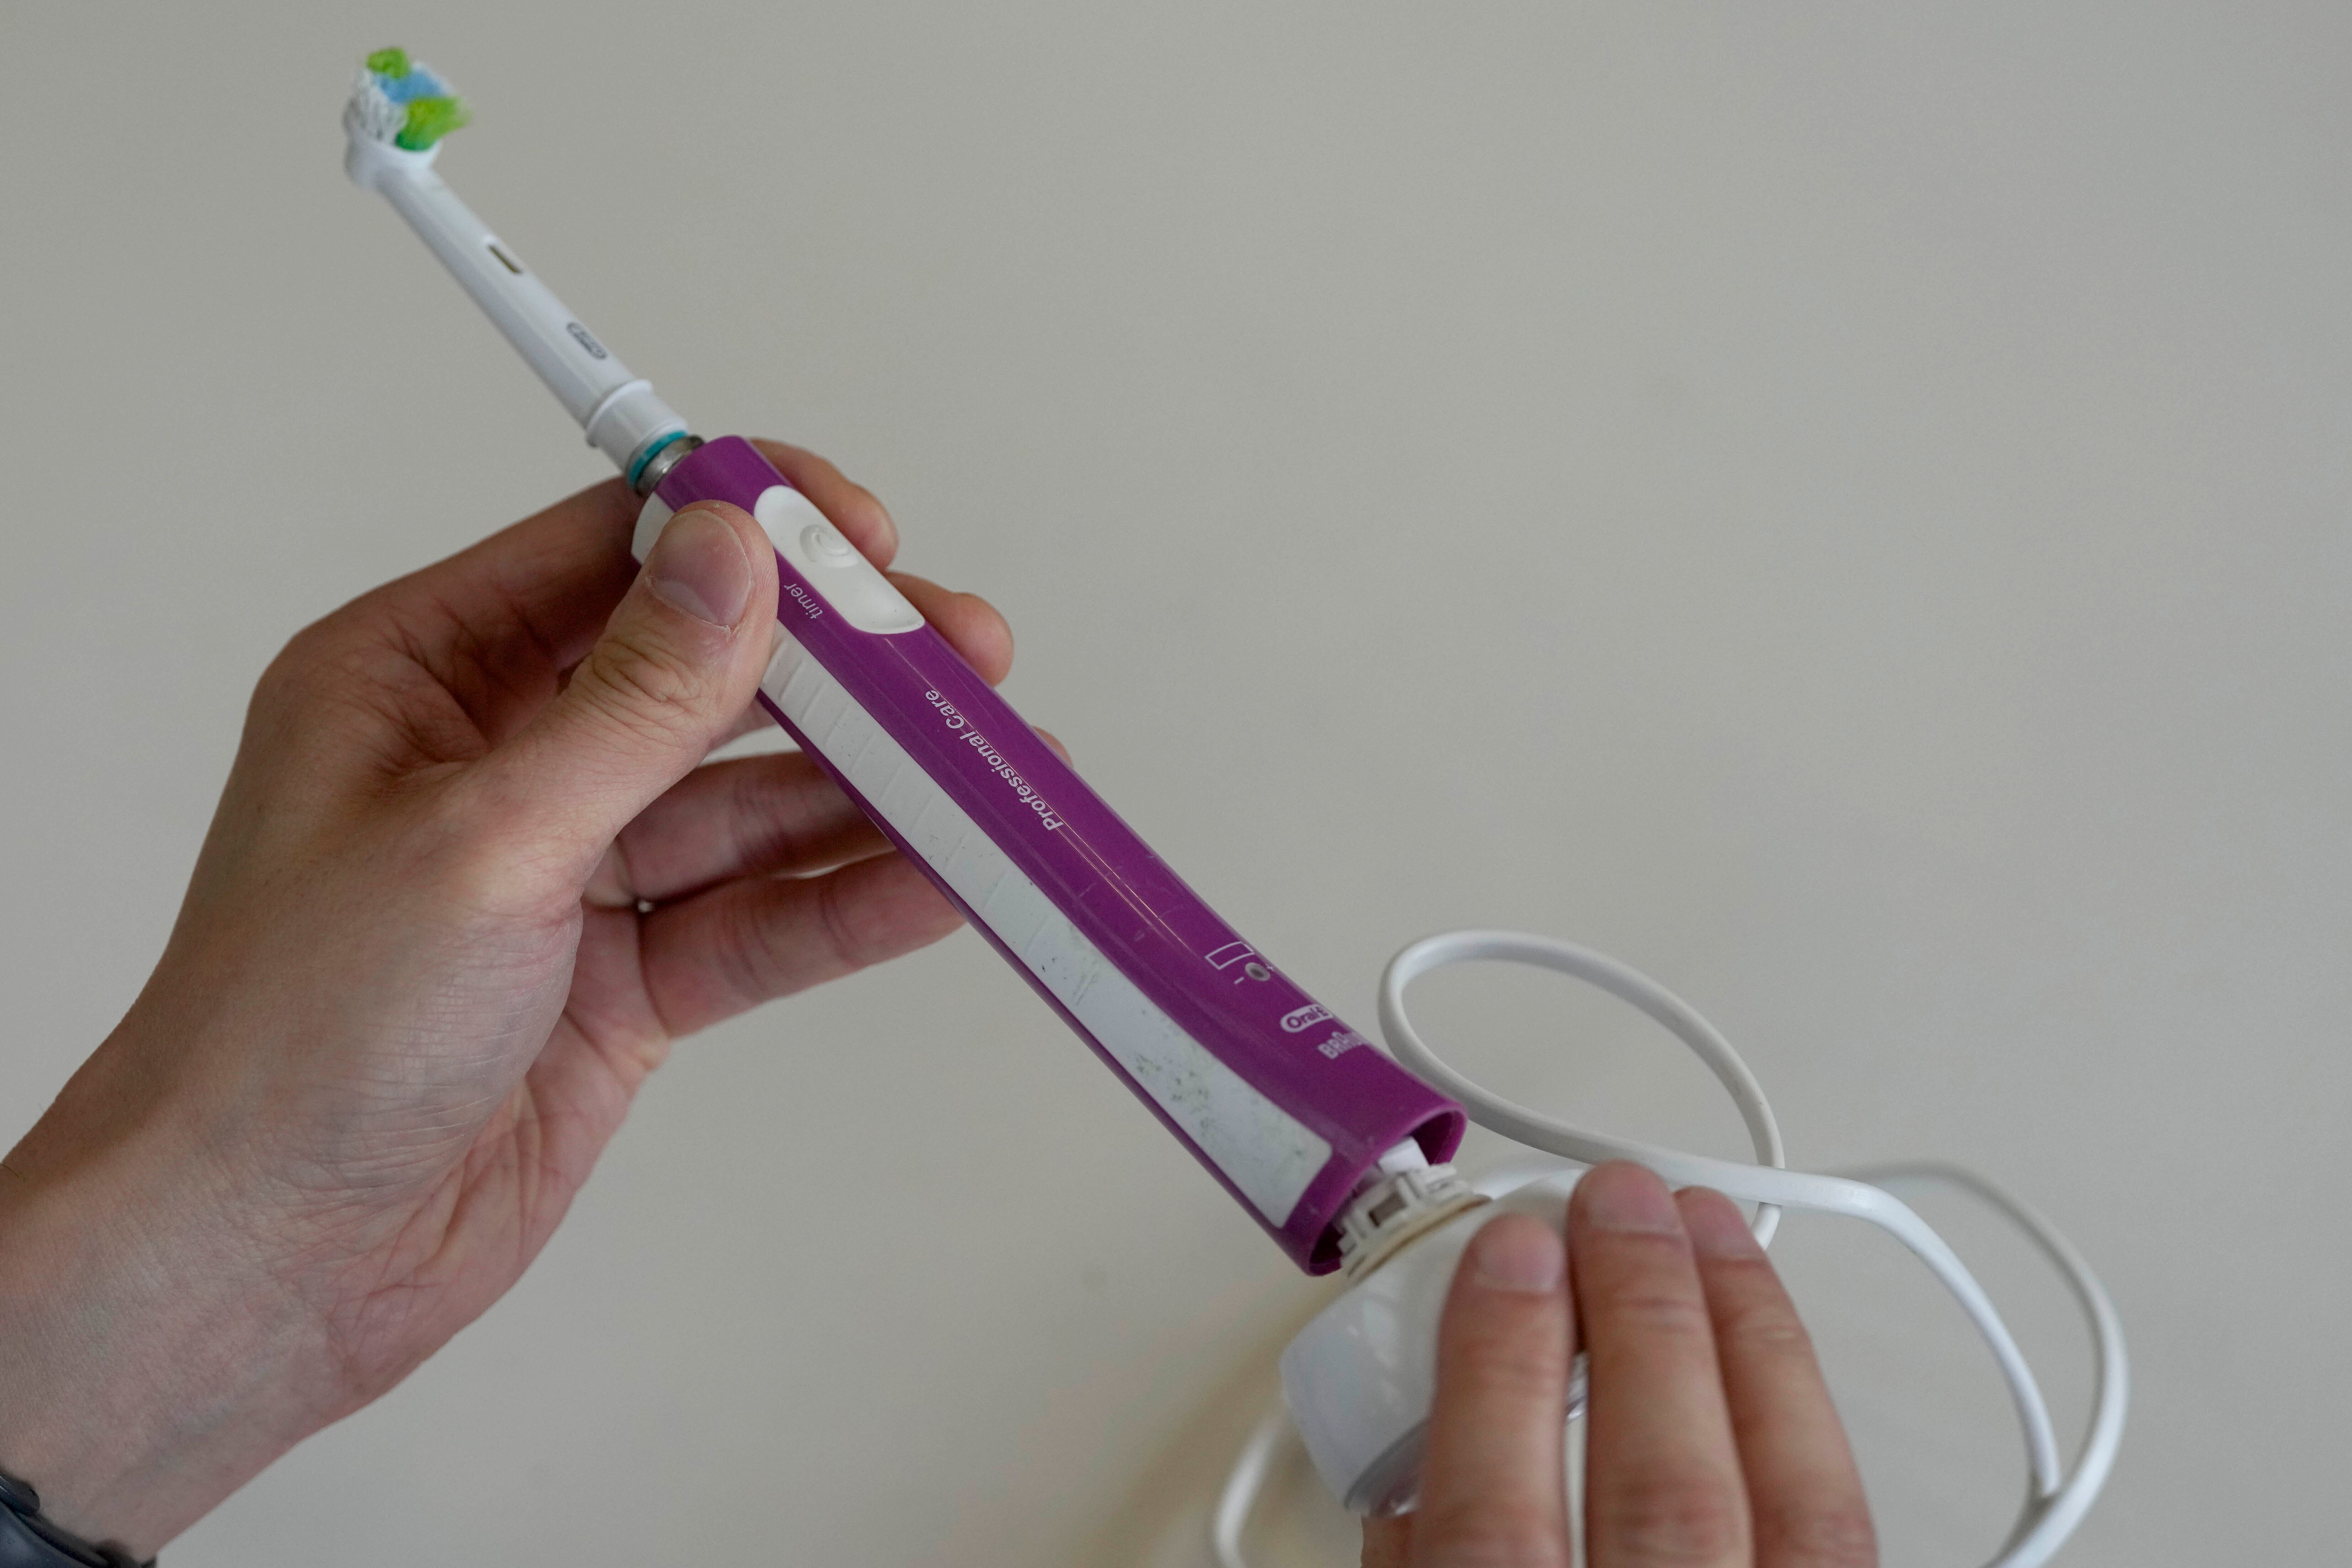 Dismantling an electric toothbrush by twisting the docking station in its port